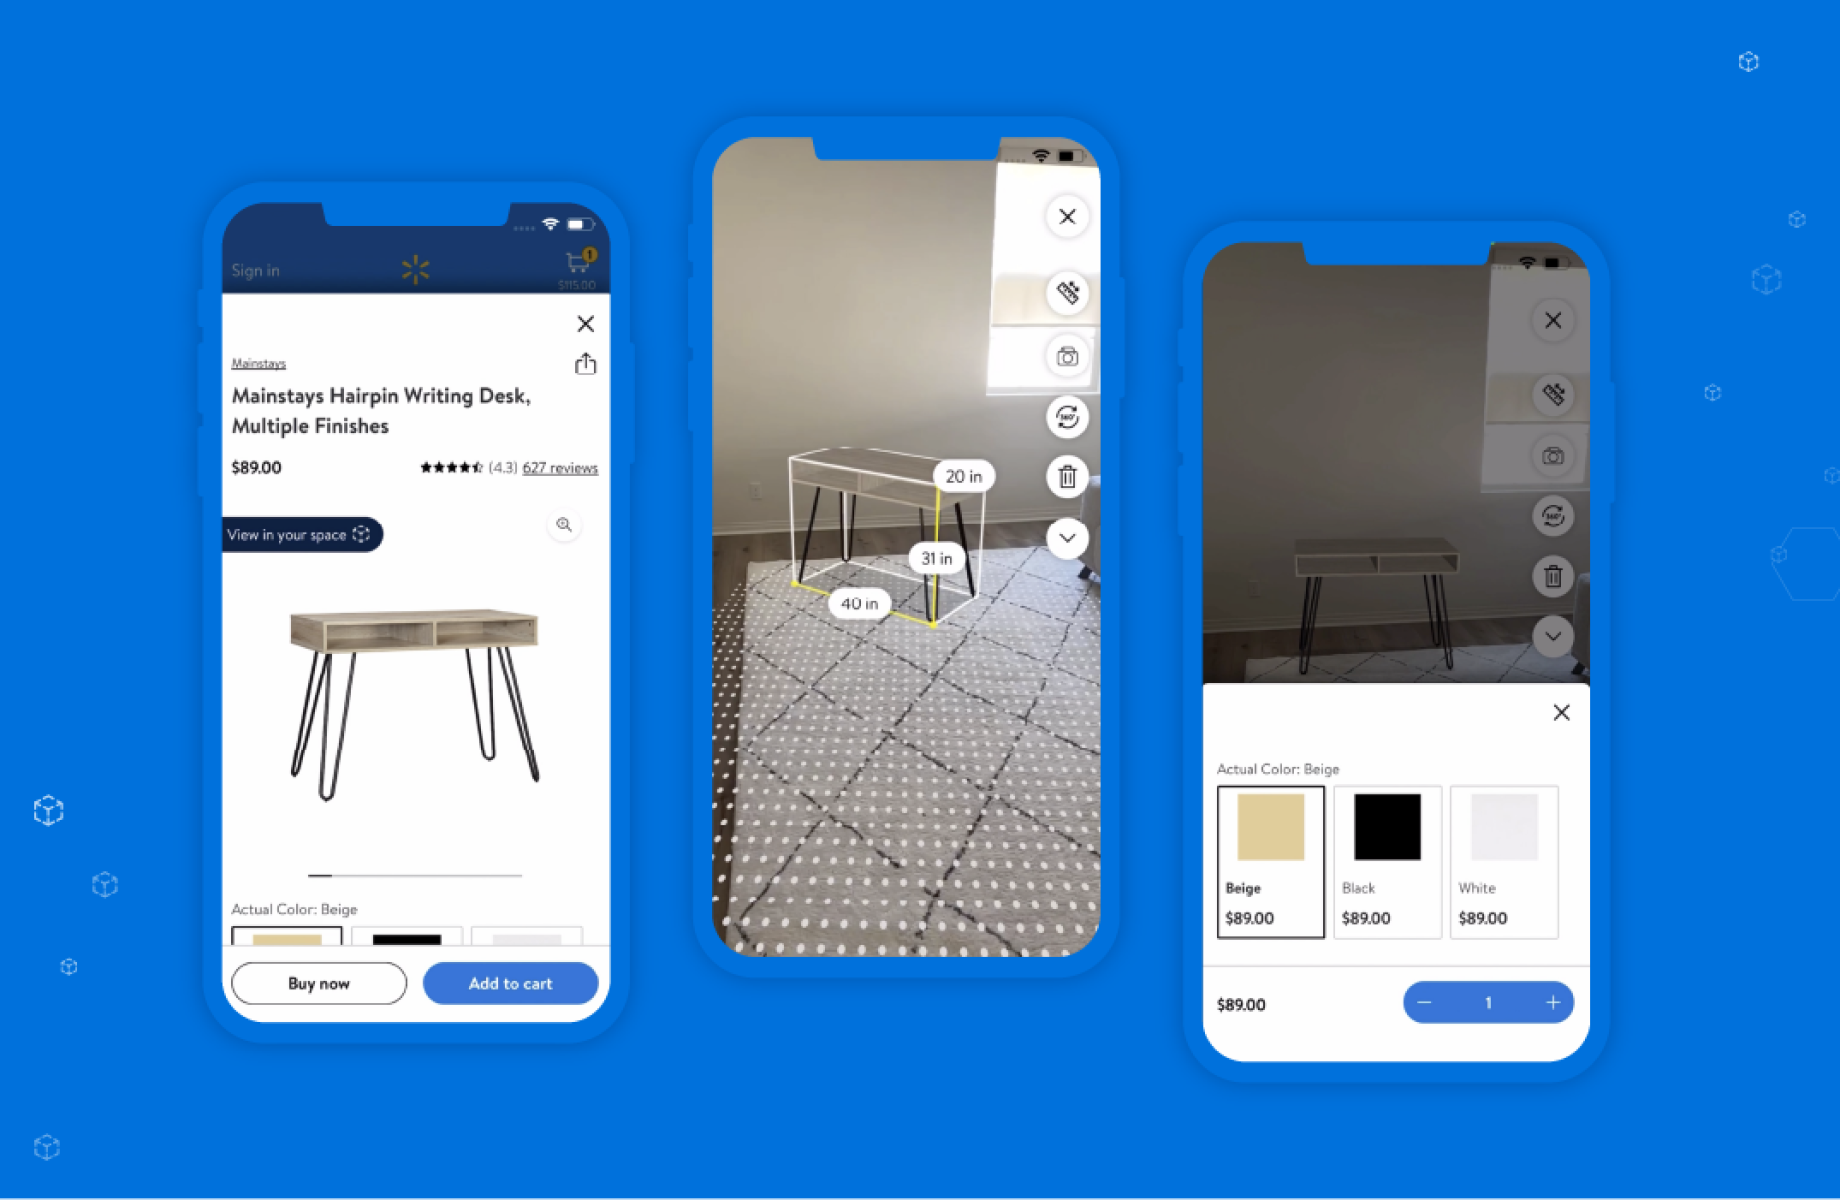 Walmart to introduce augmented reality features for mobile app